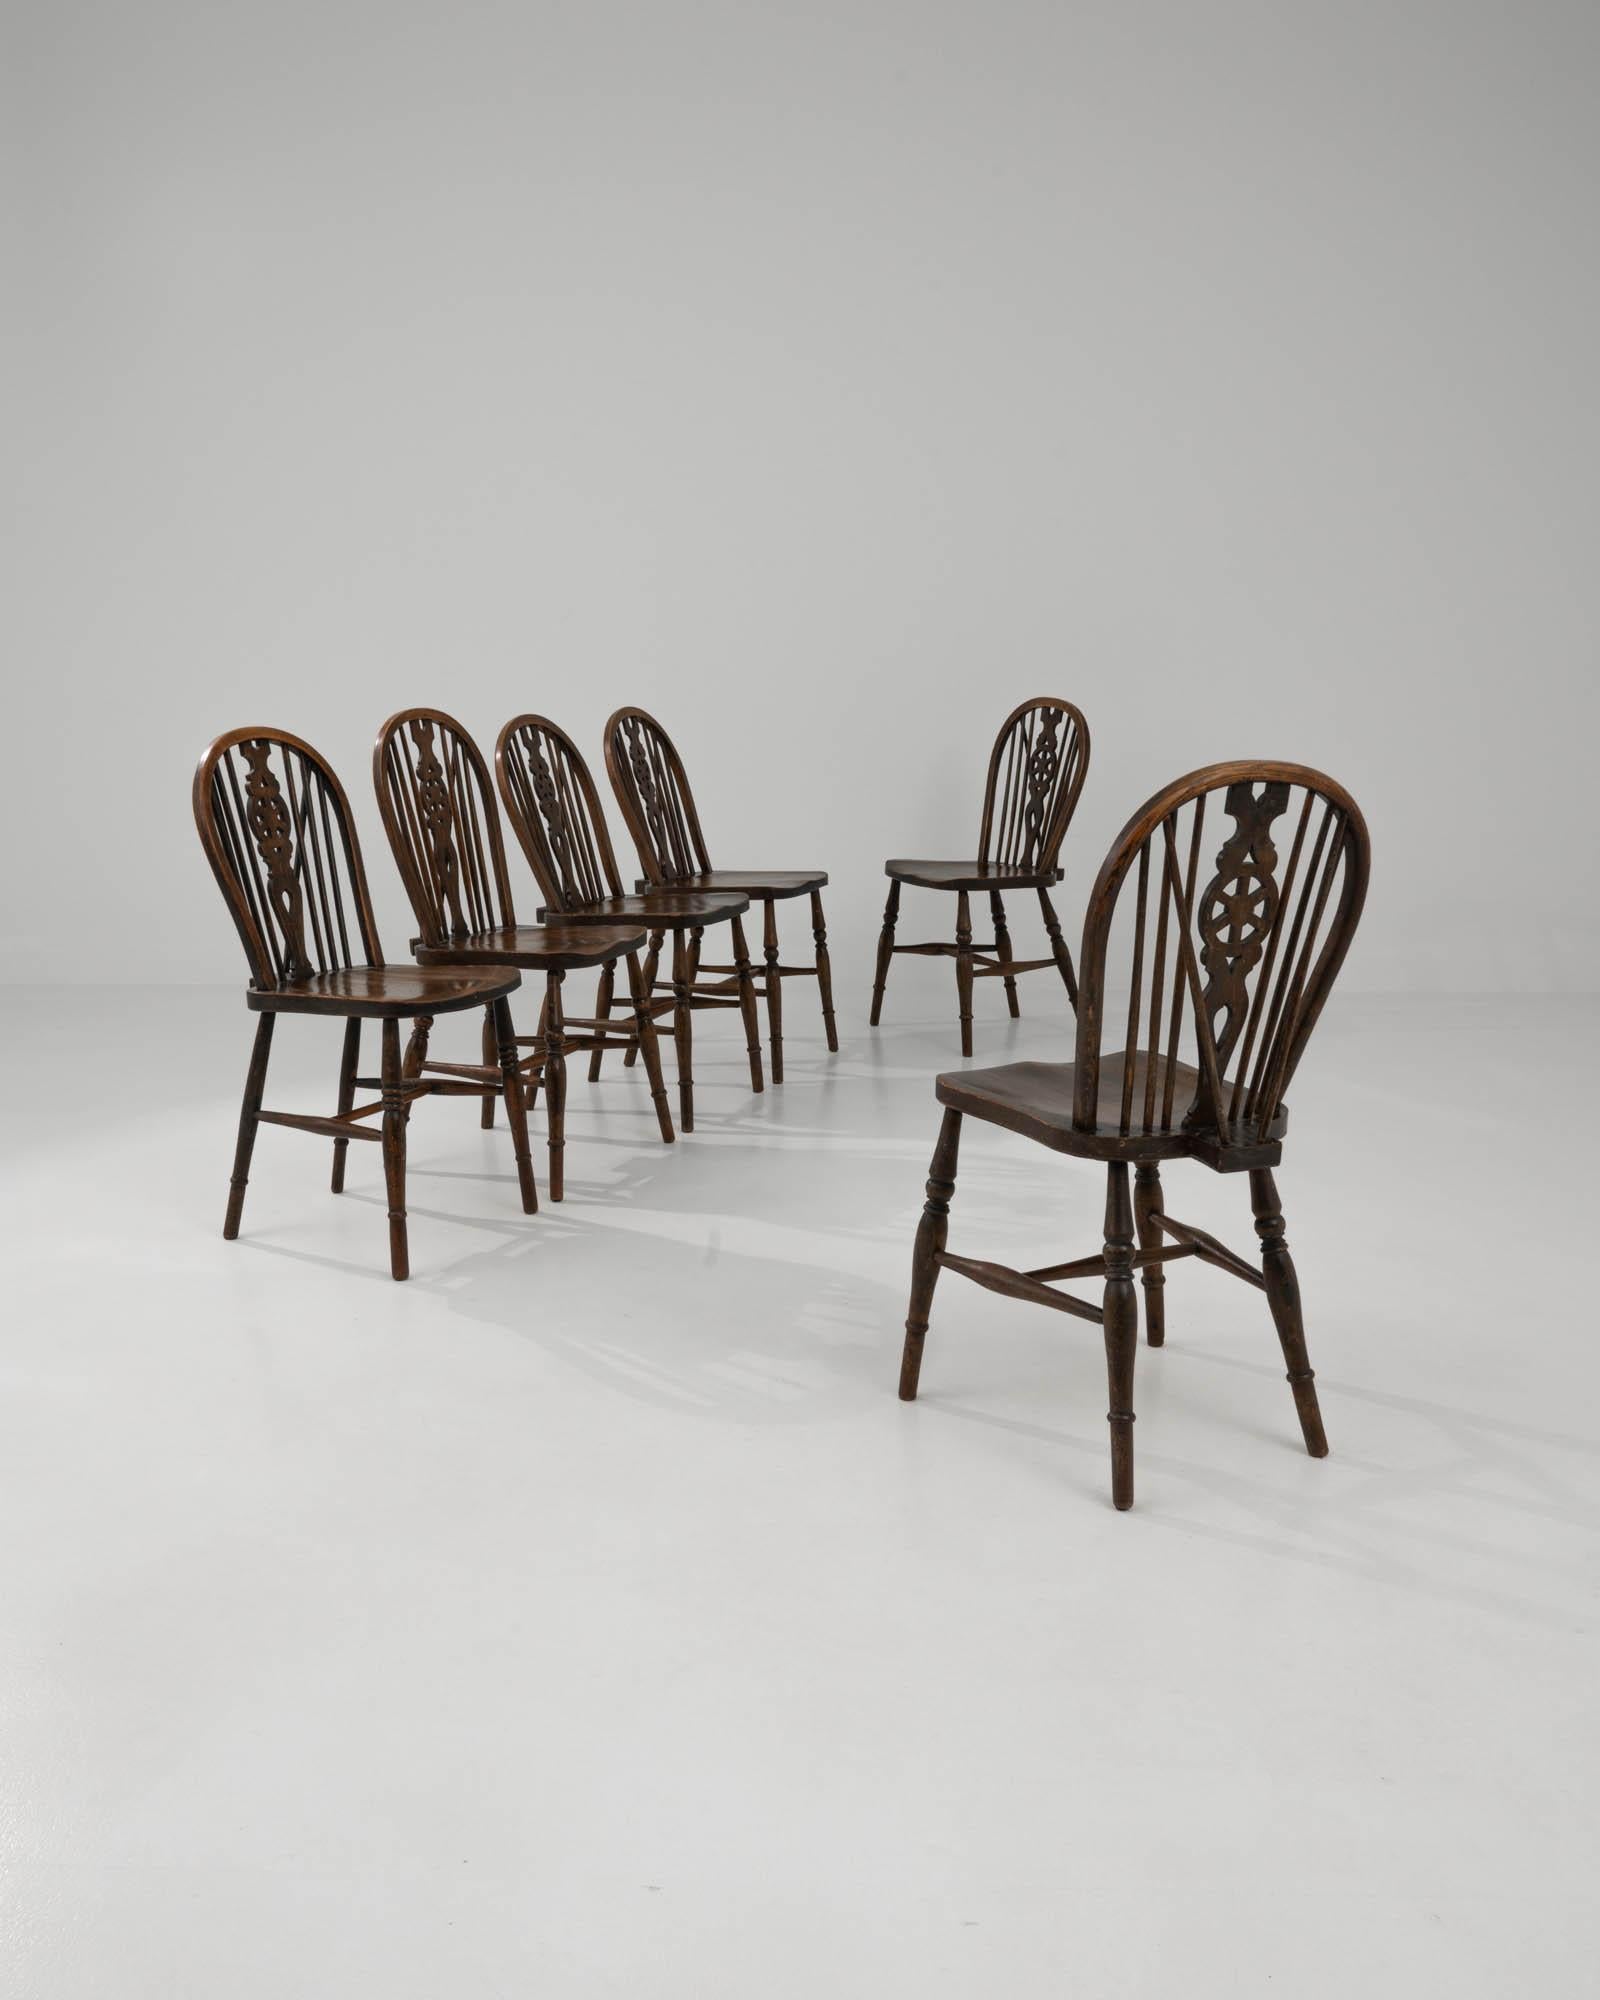 Combining a rich original patina with a handsome country silhouette, this set of six wooden dining chairs offer a timeless vintage accent. Made in the United Kingdom in the early 20th century, the form is typical for British farmhouse chairs.